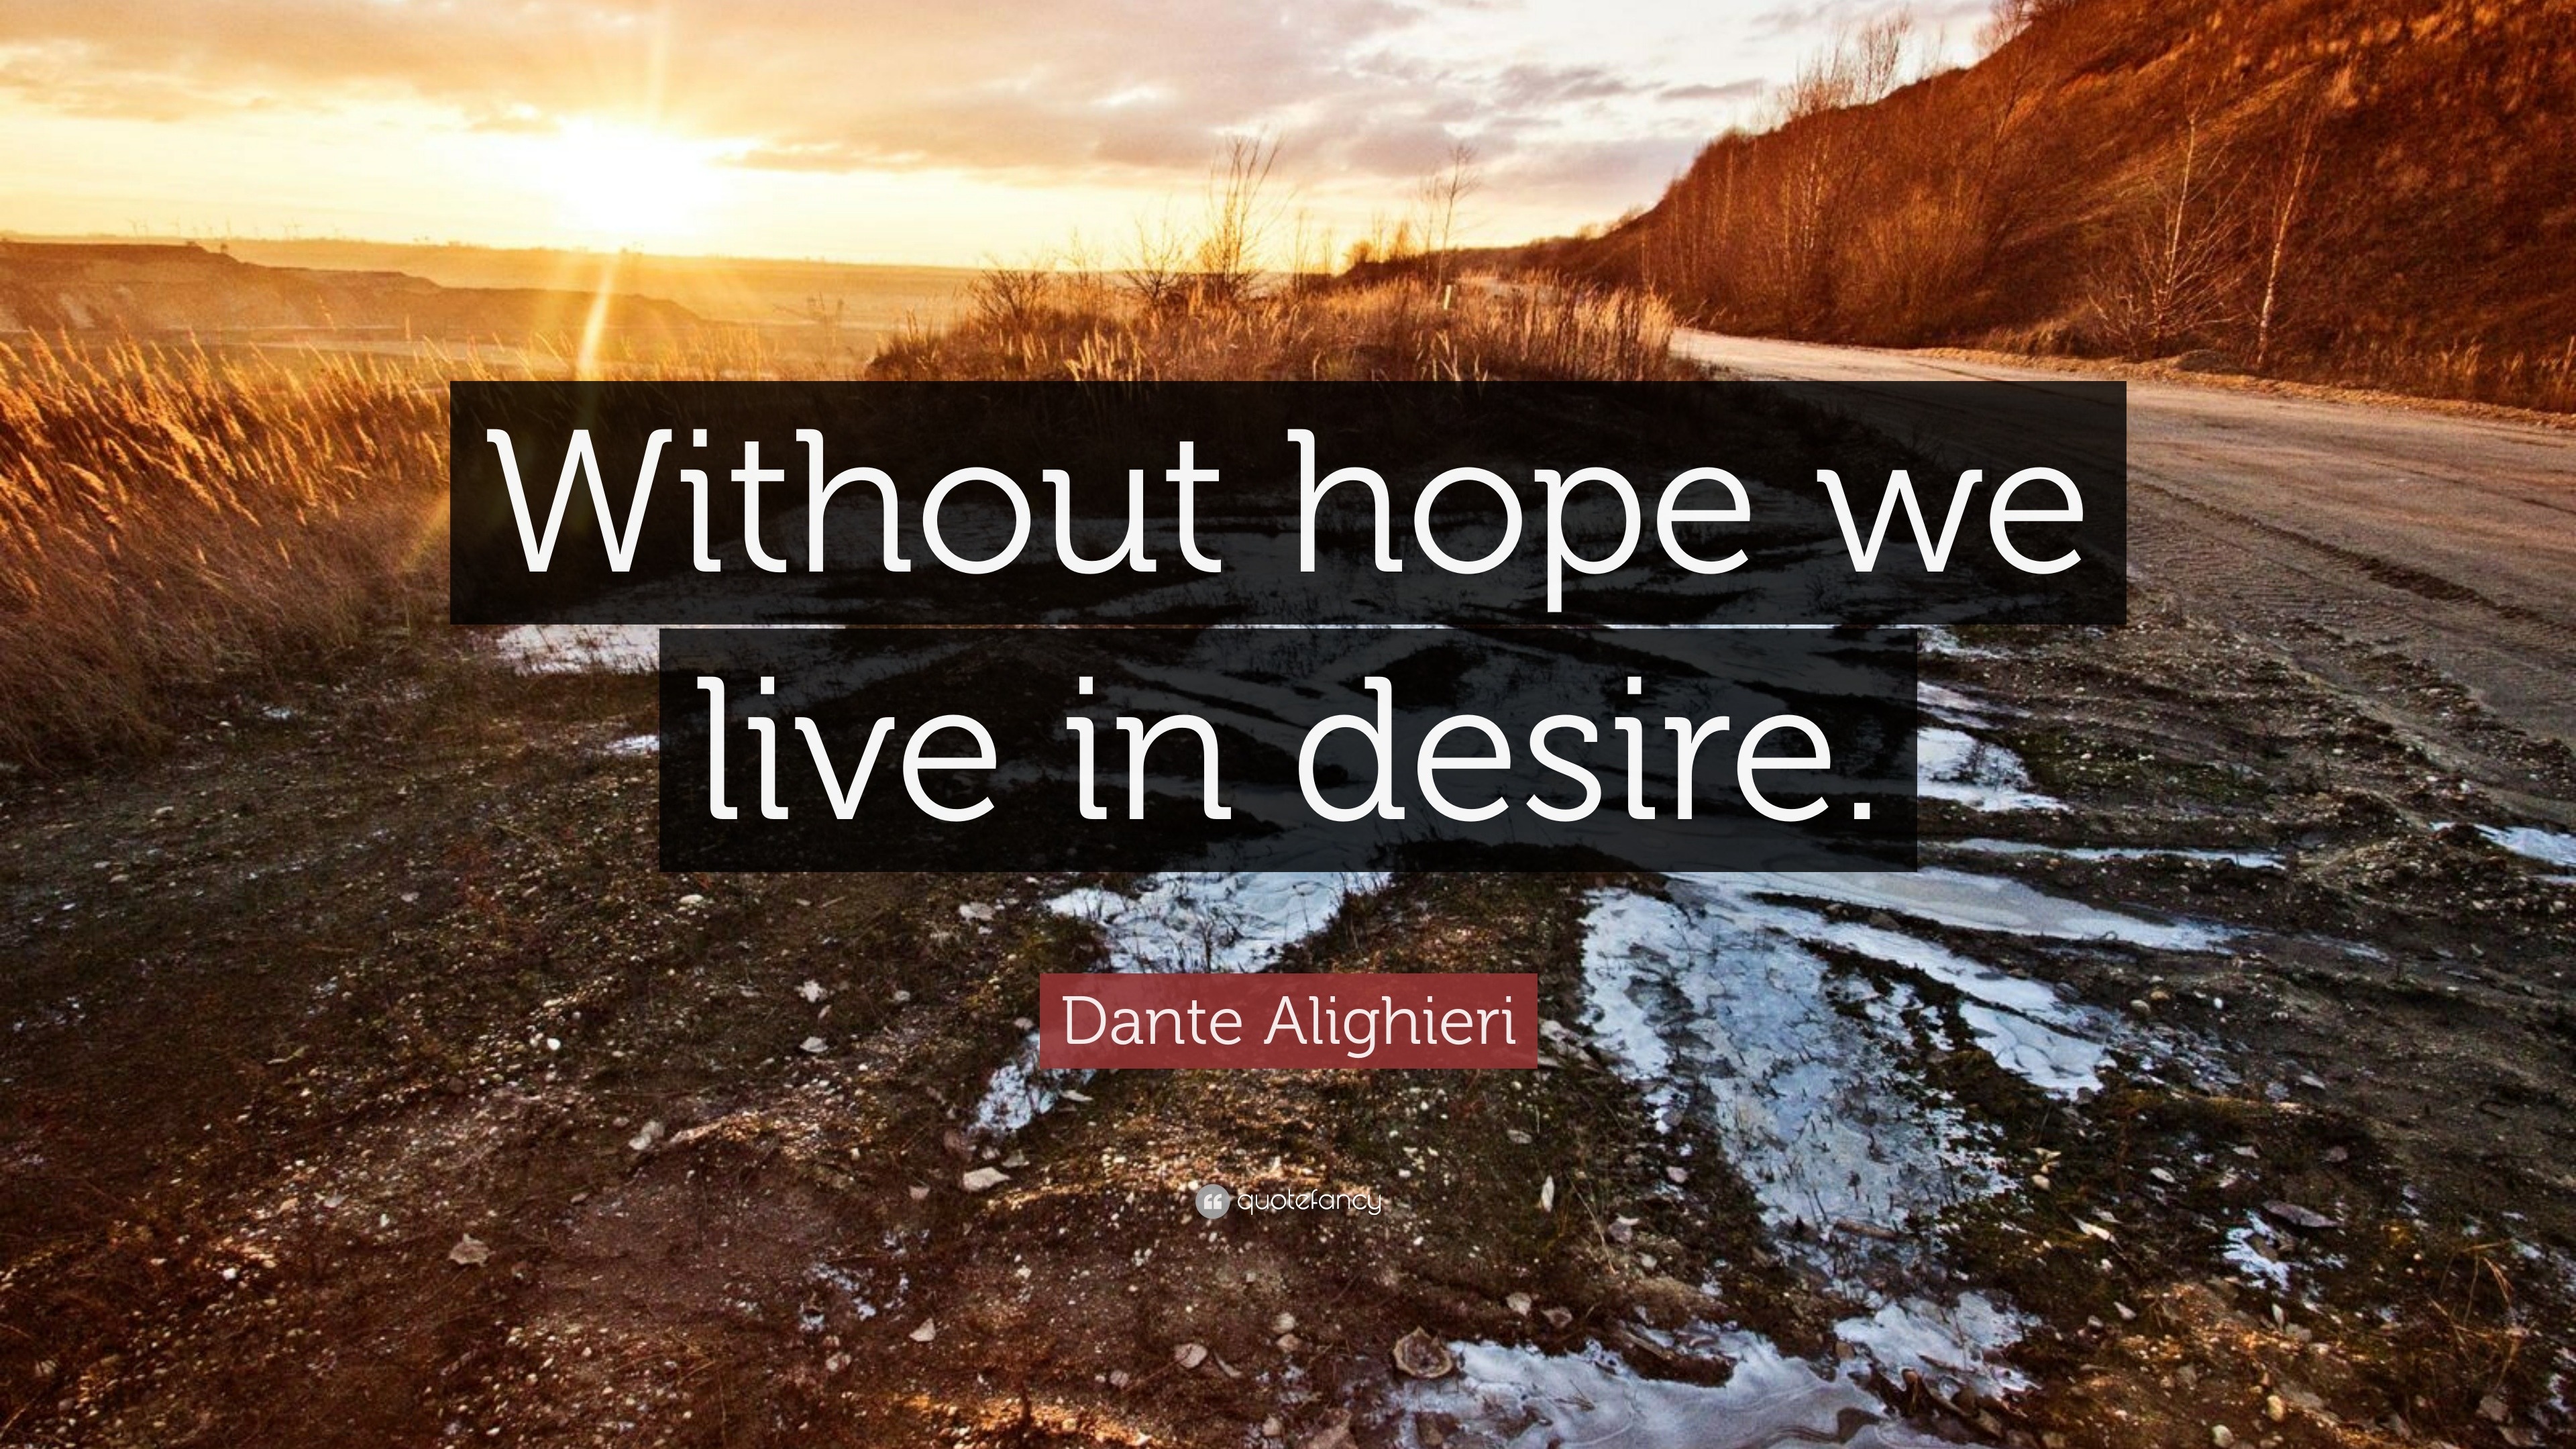 Dante Alighieri Quote: “Without hope we live in desire.”